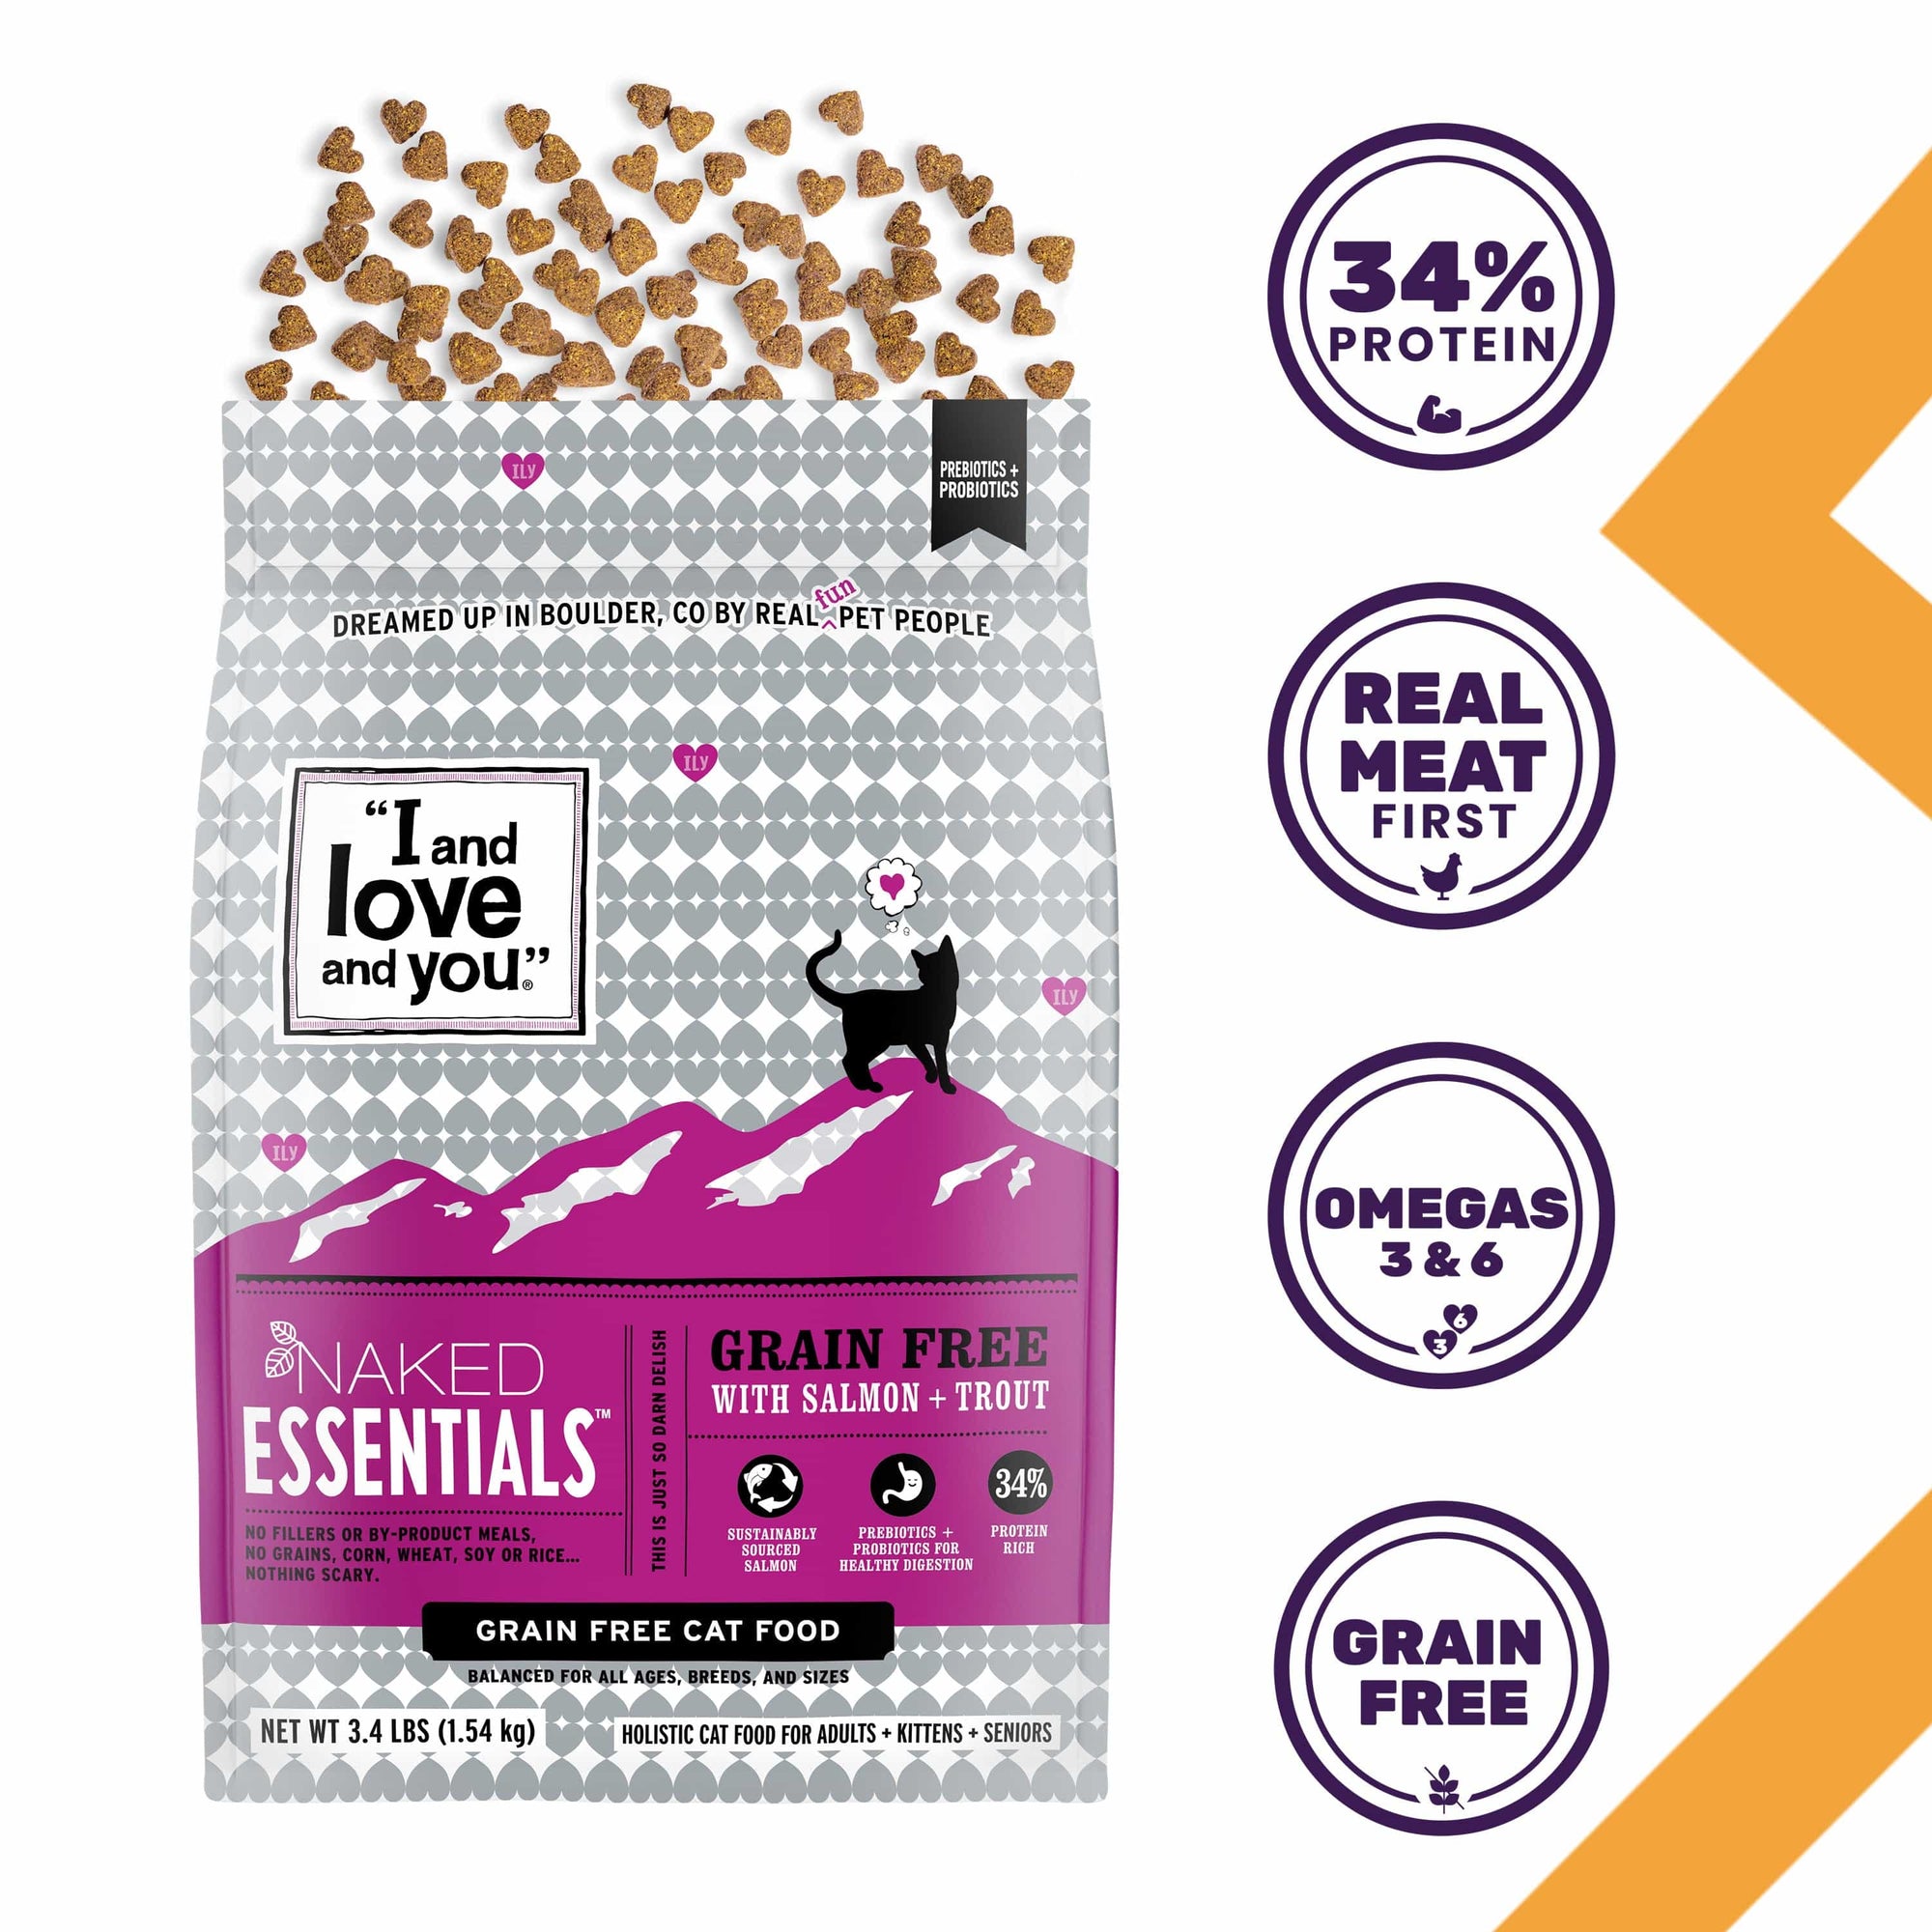 A bag of cat food with a logo featuring a chicken and text, alongside a purple circle with numbers and text.